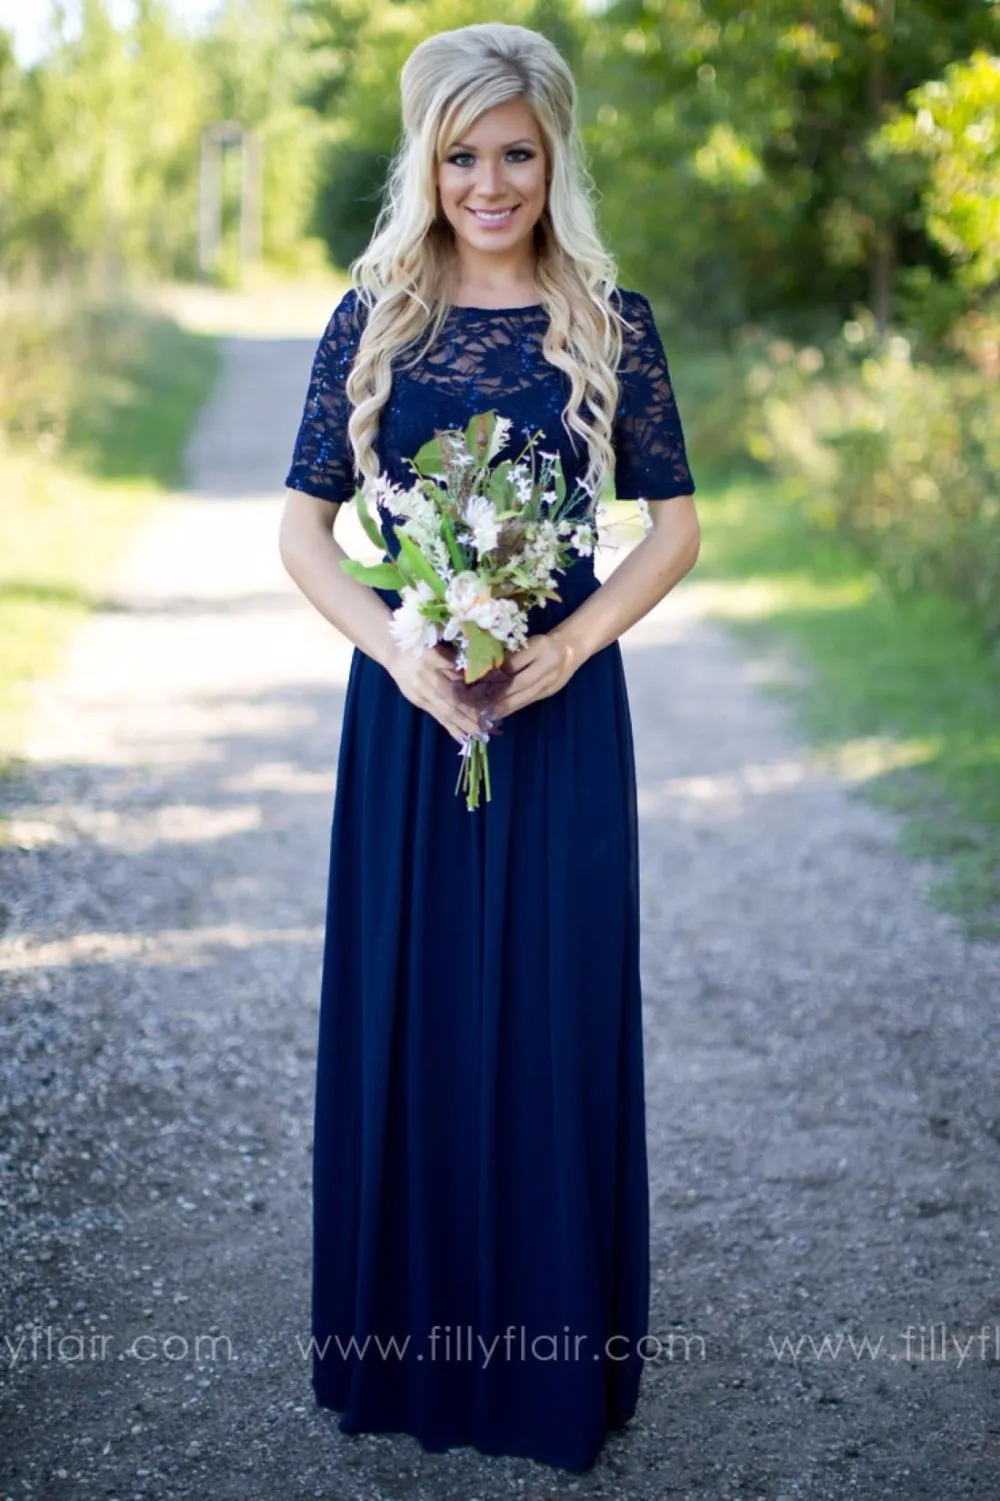 Sparkly Lace Royal Blue Long Modest Bridesmaid Dresses With Half Sleeves Rustic Women Formal Evening Wedding Party Dresses Cheap Custom Made